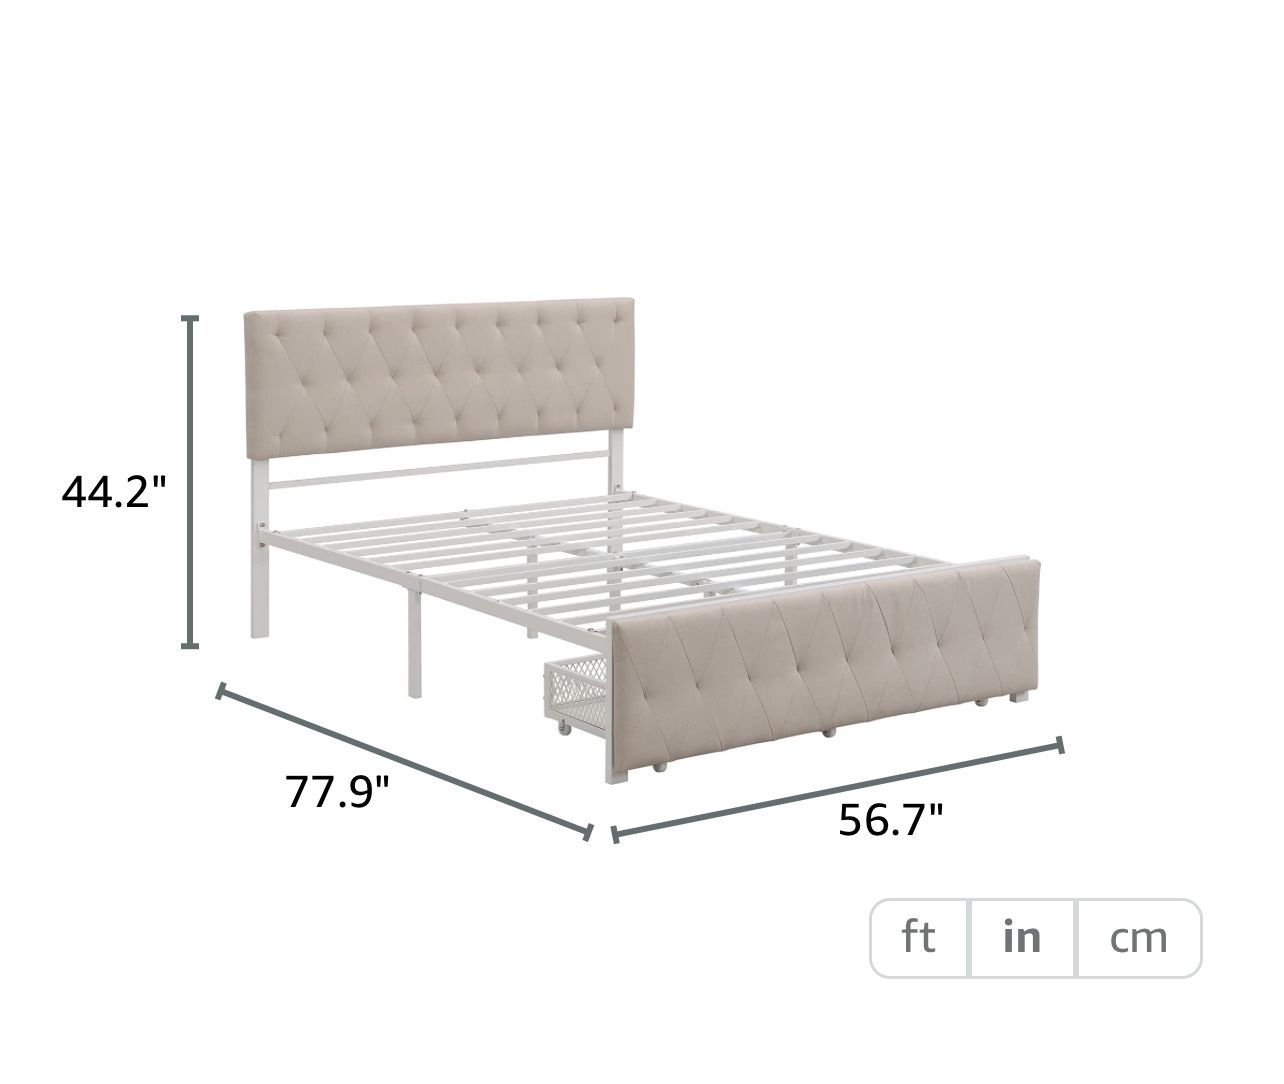 Full Bed with Drawers, Upholstered Platform Bed with Headboard, Metal Bed Frame with Storage for Boys, Girls, Kids, Teens, Beige